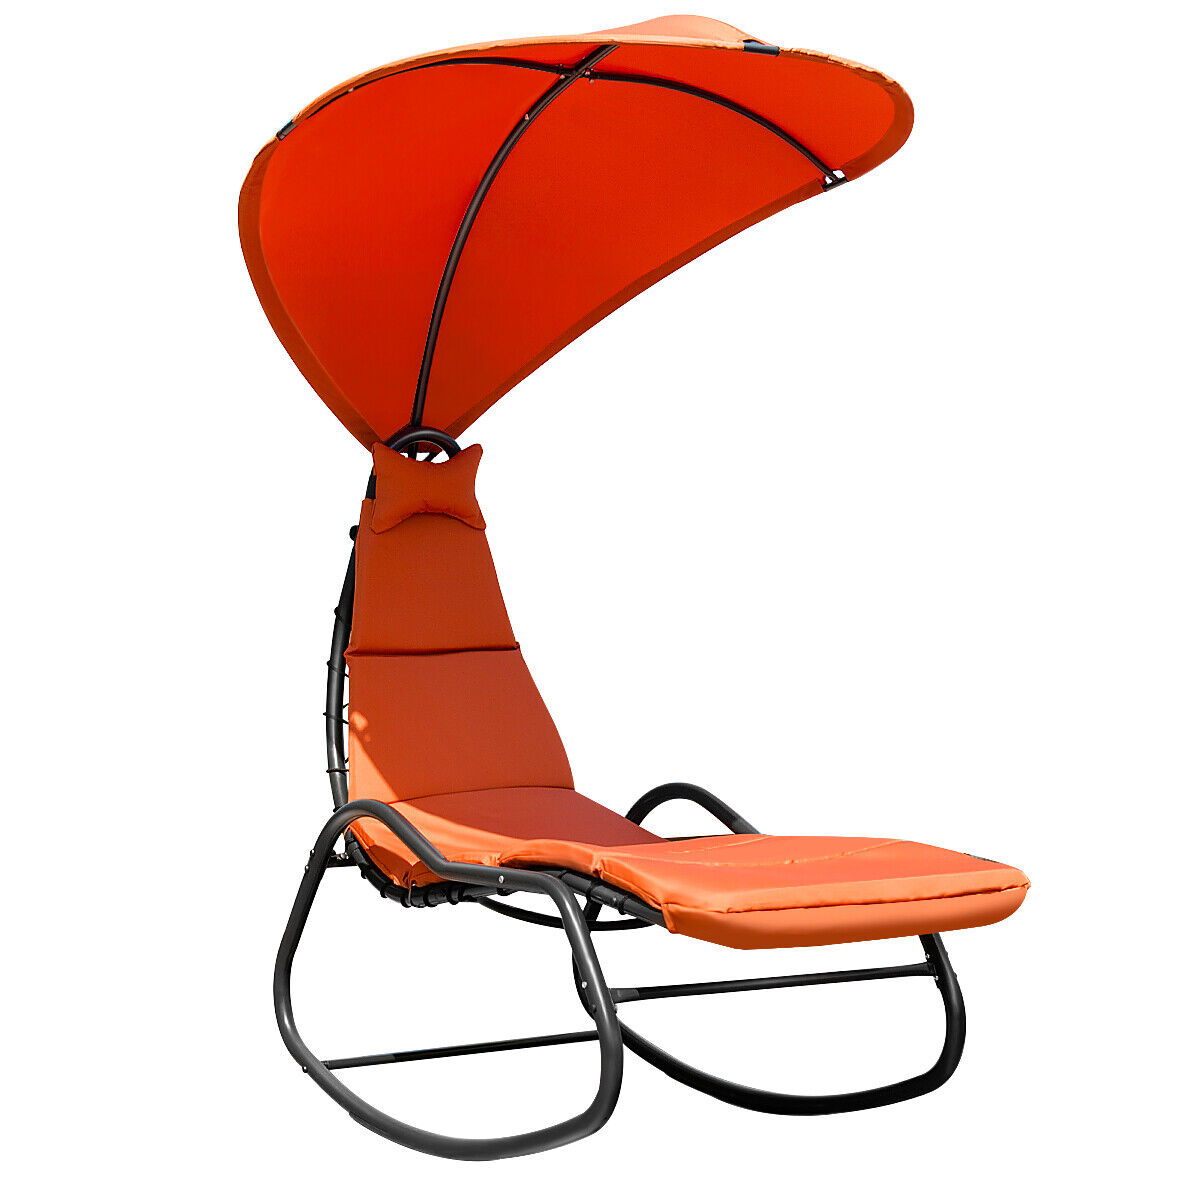 Great Choice Products Patio Hanging Chaise Lounge Chair Swing Hammock Canopy Outdoor Orange